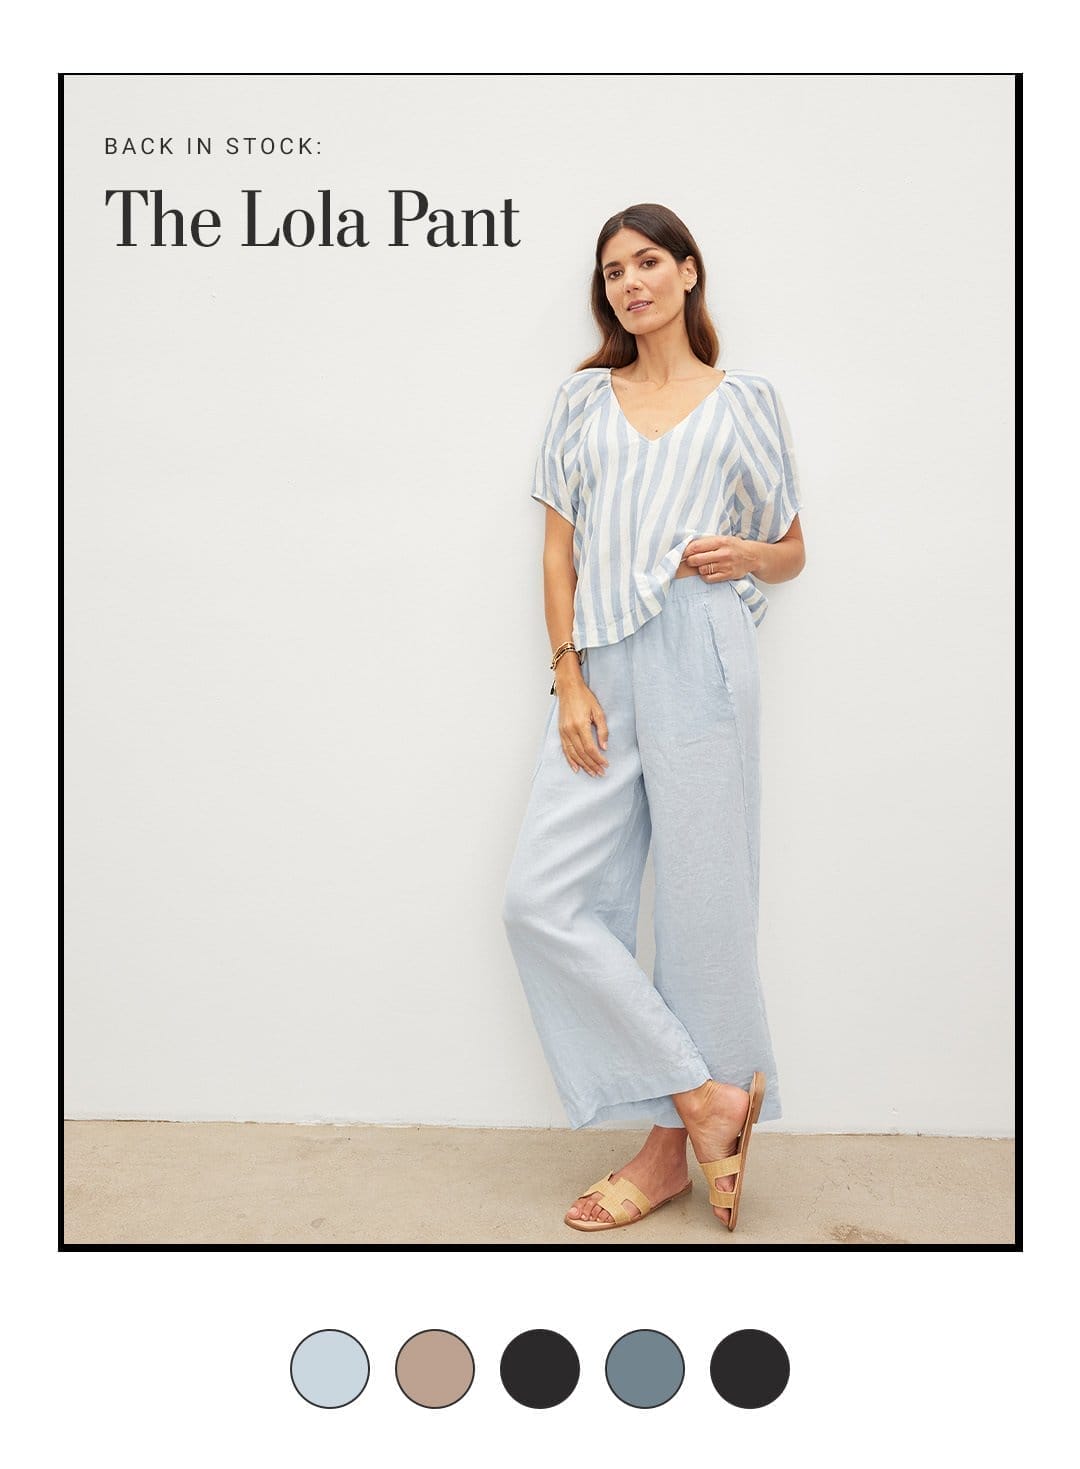 BACK IN STOCK: The Lola Pant